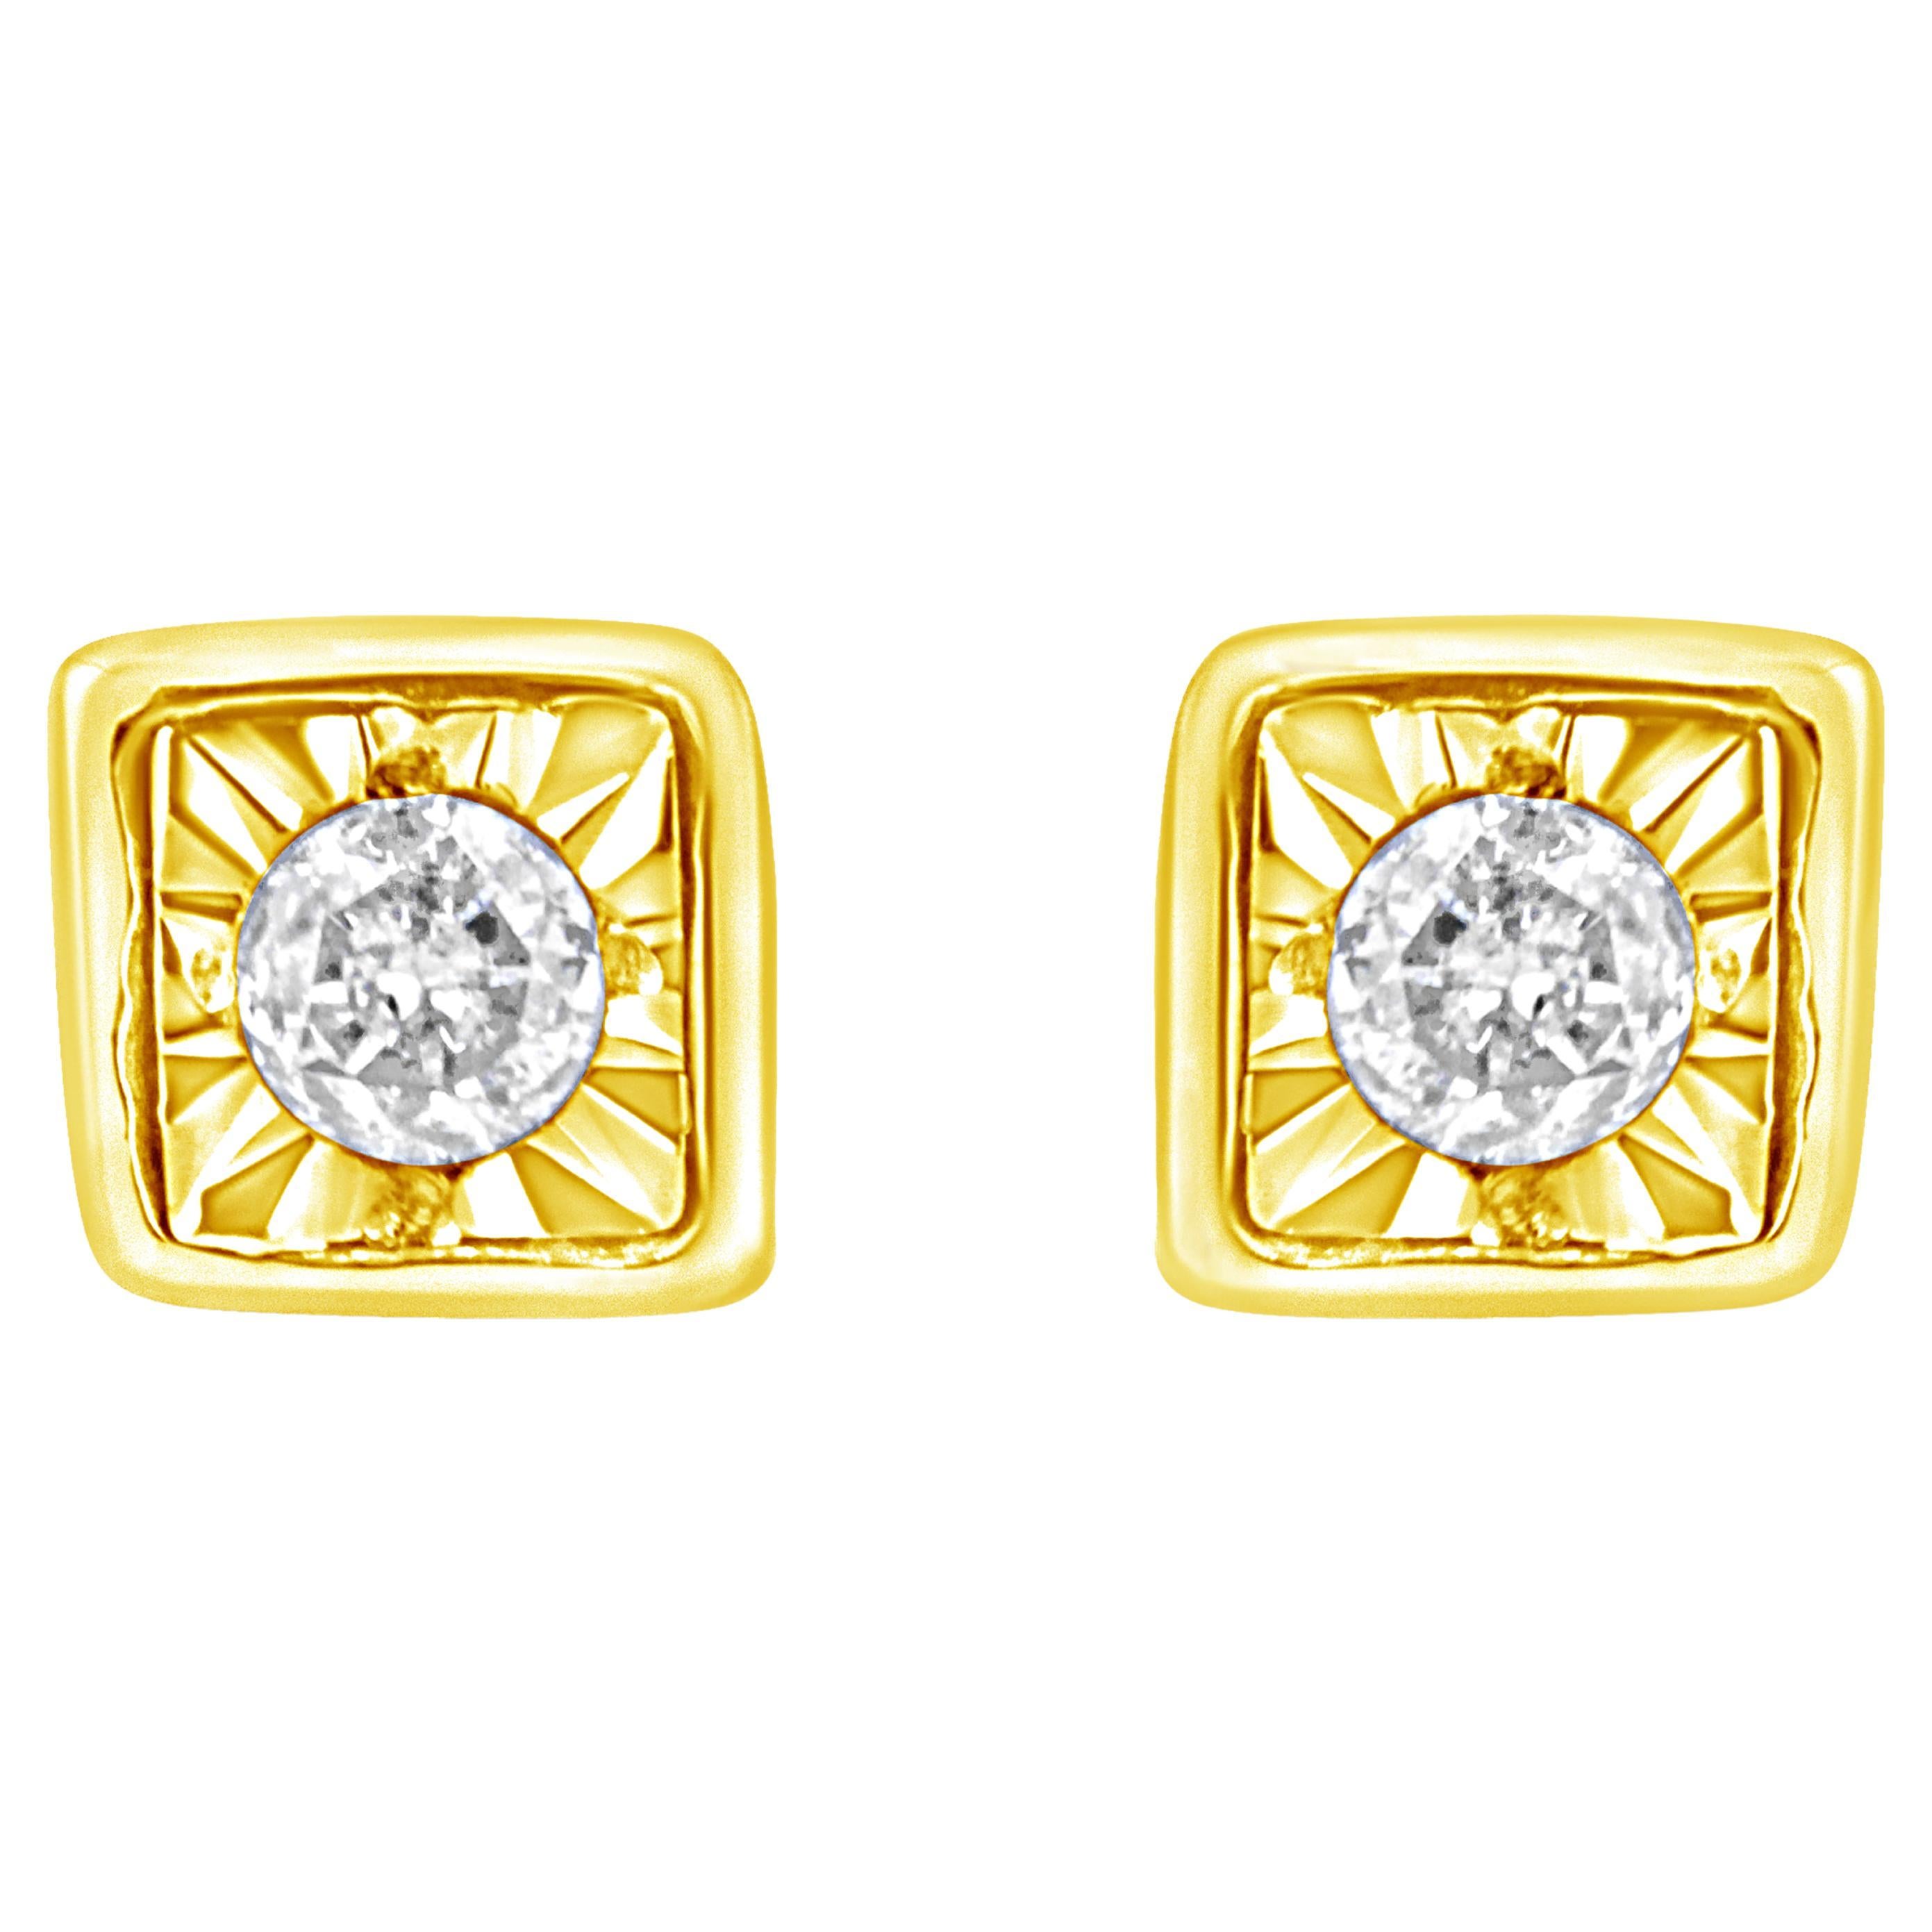 Yellow Gold Plated Sterling Silver 1/10 Carat Diamond Square Stud Earrings